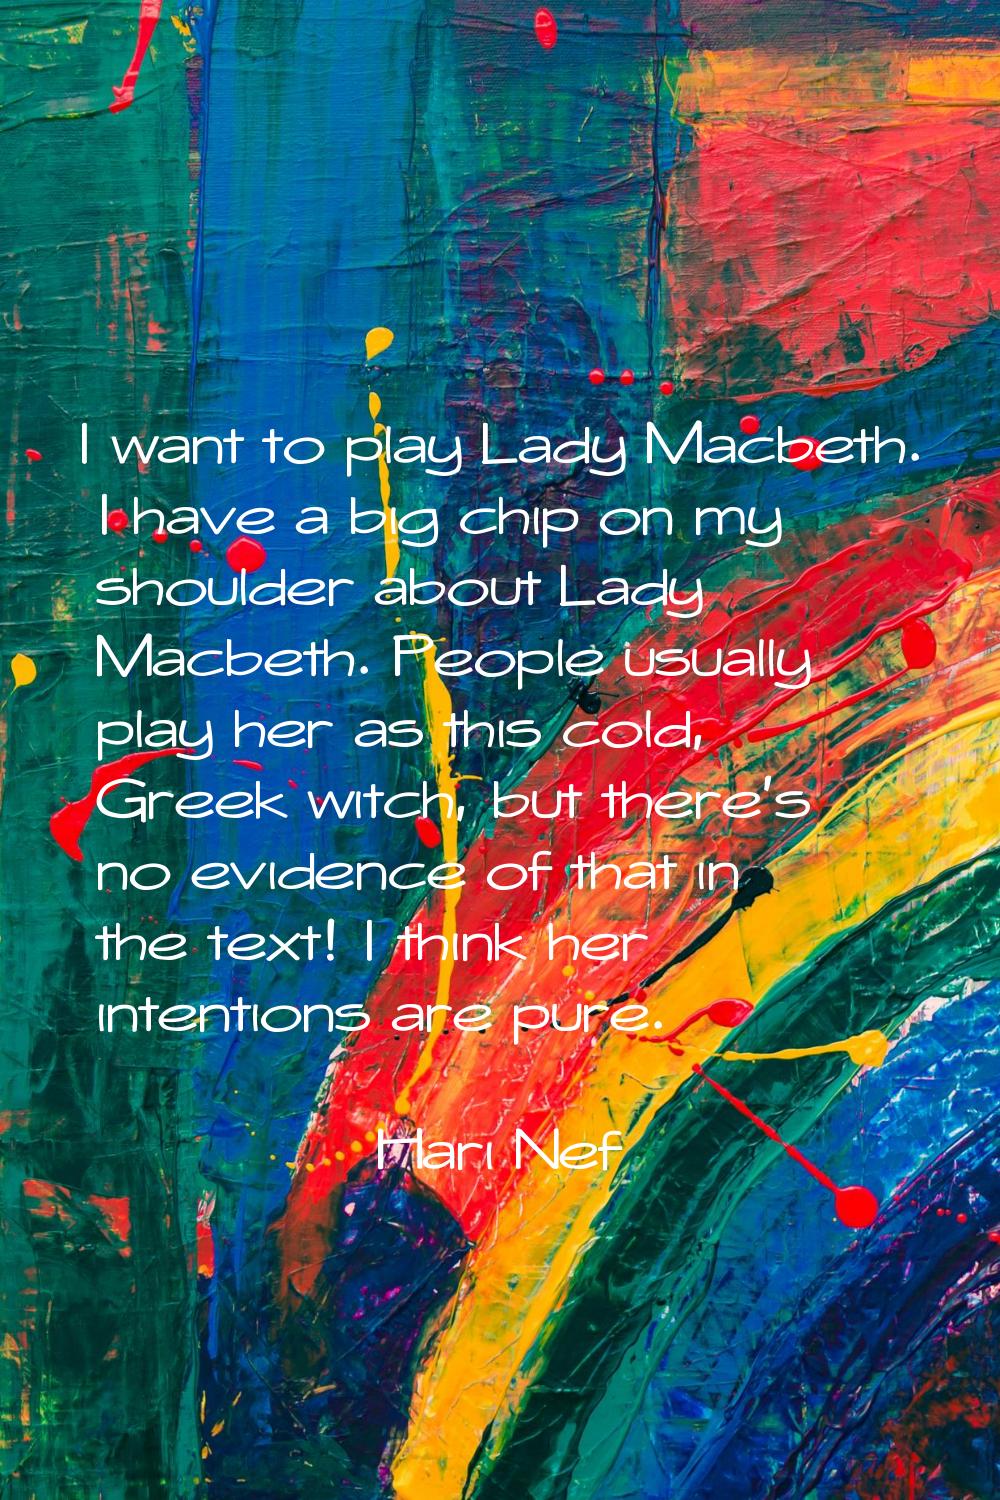 I want to play Lady Macbeth. I have a big chip on my shoulder about Lady Macbeth. People usually pl